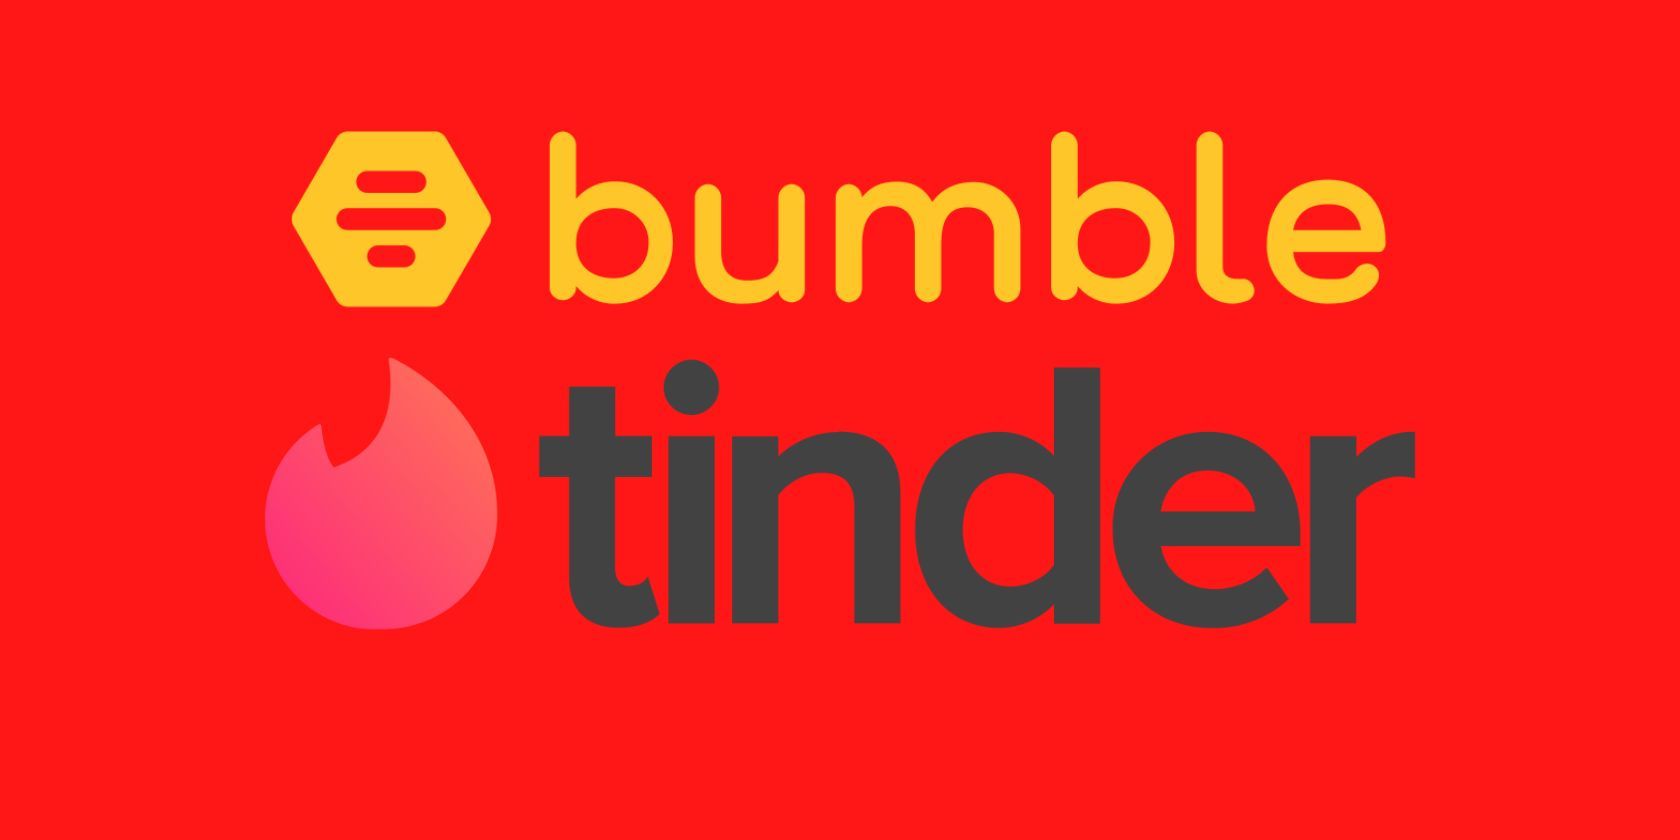 The Bumble and Tinder logos on a red background